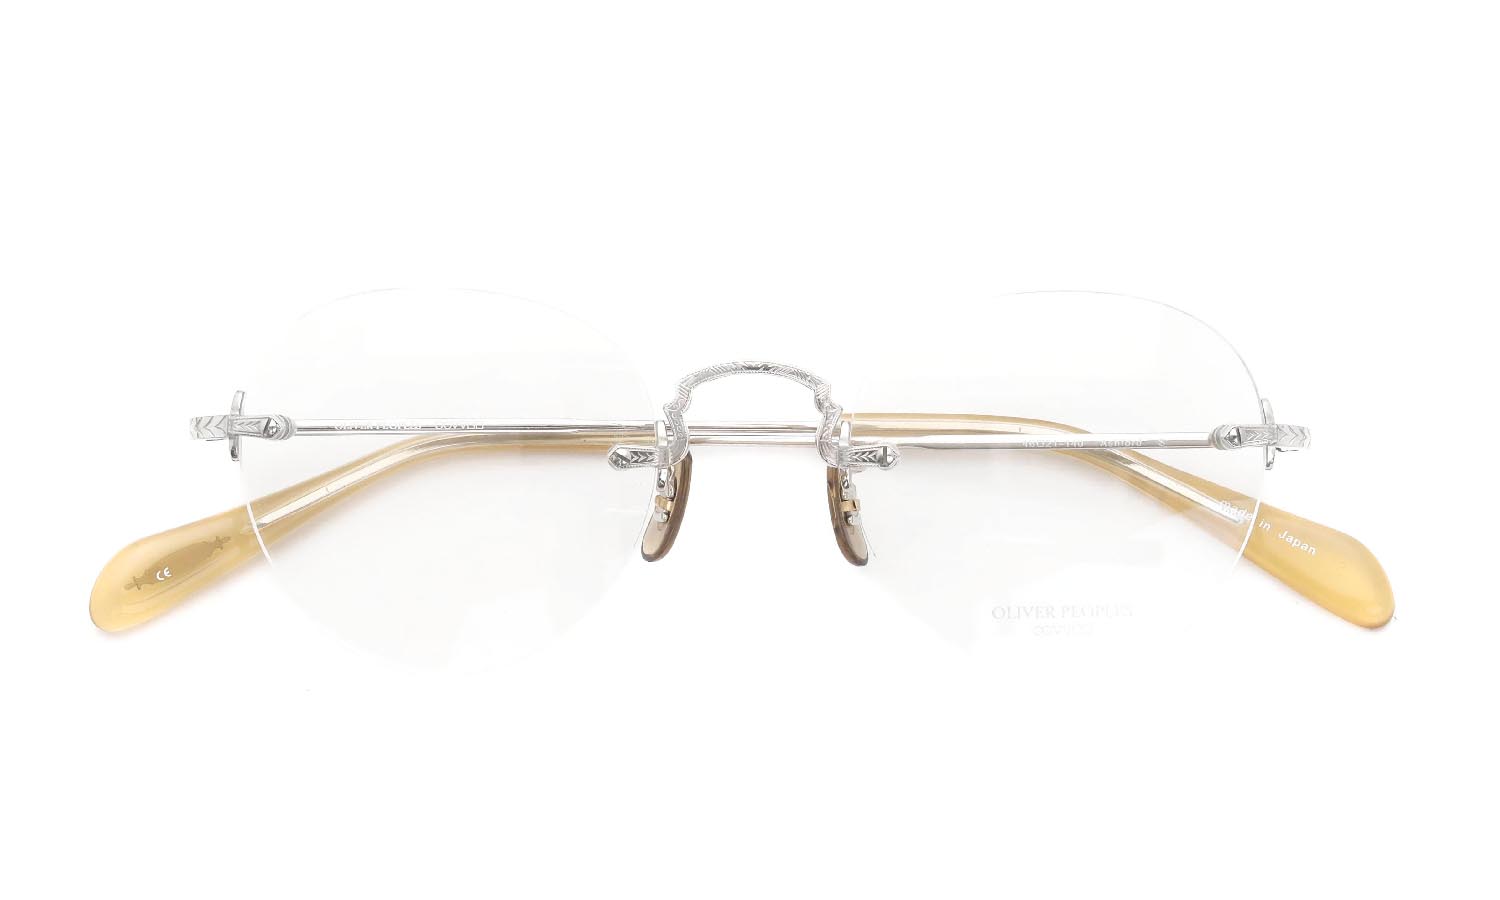 OLIVER PEOPLES archive Ashford S